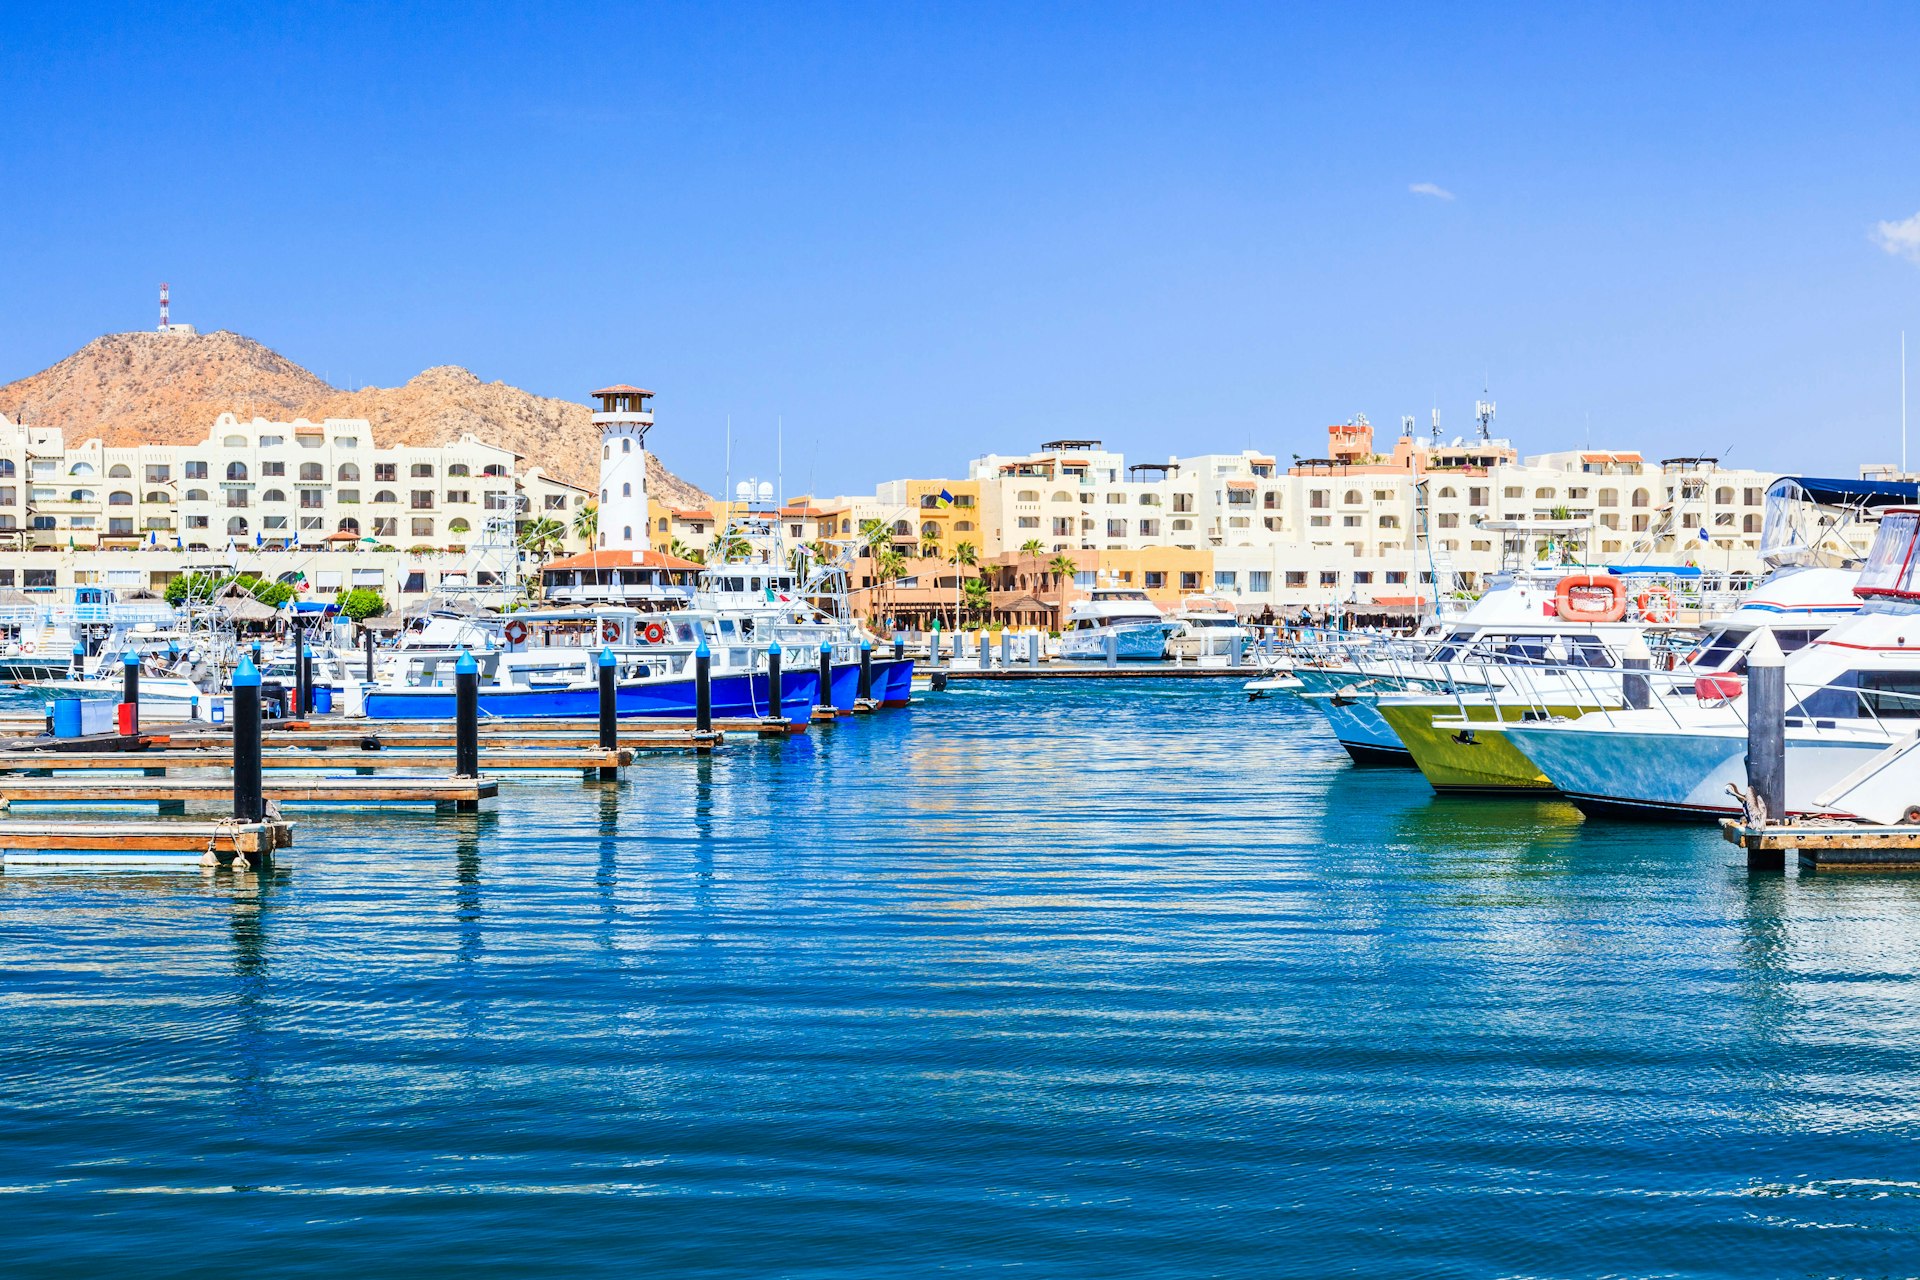 Two rows of boats in the turquoise water of the Cabo San Lucas marina with buildings in the distance